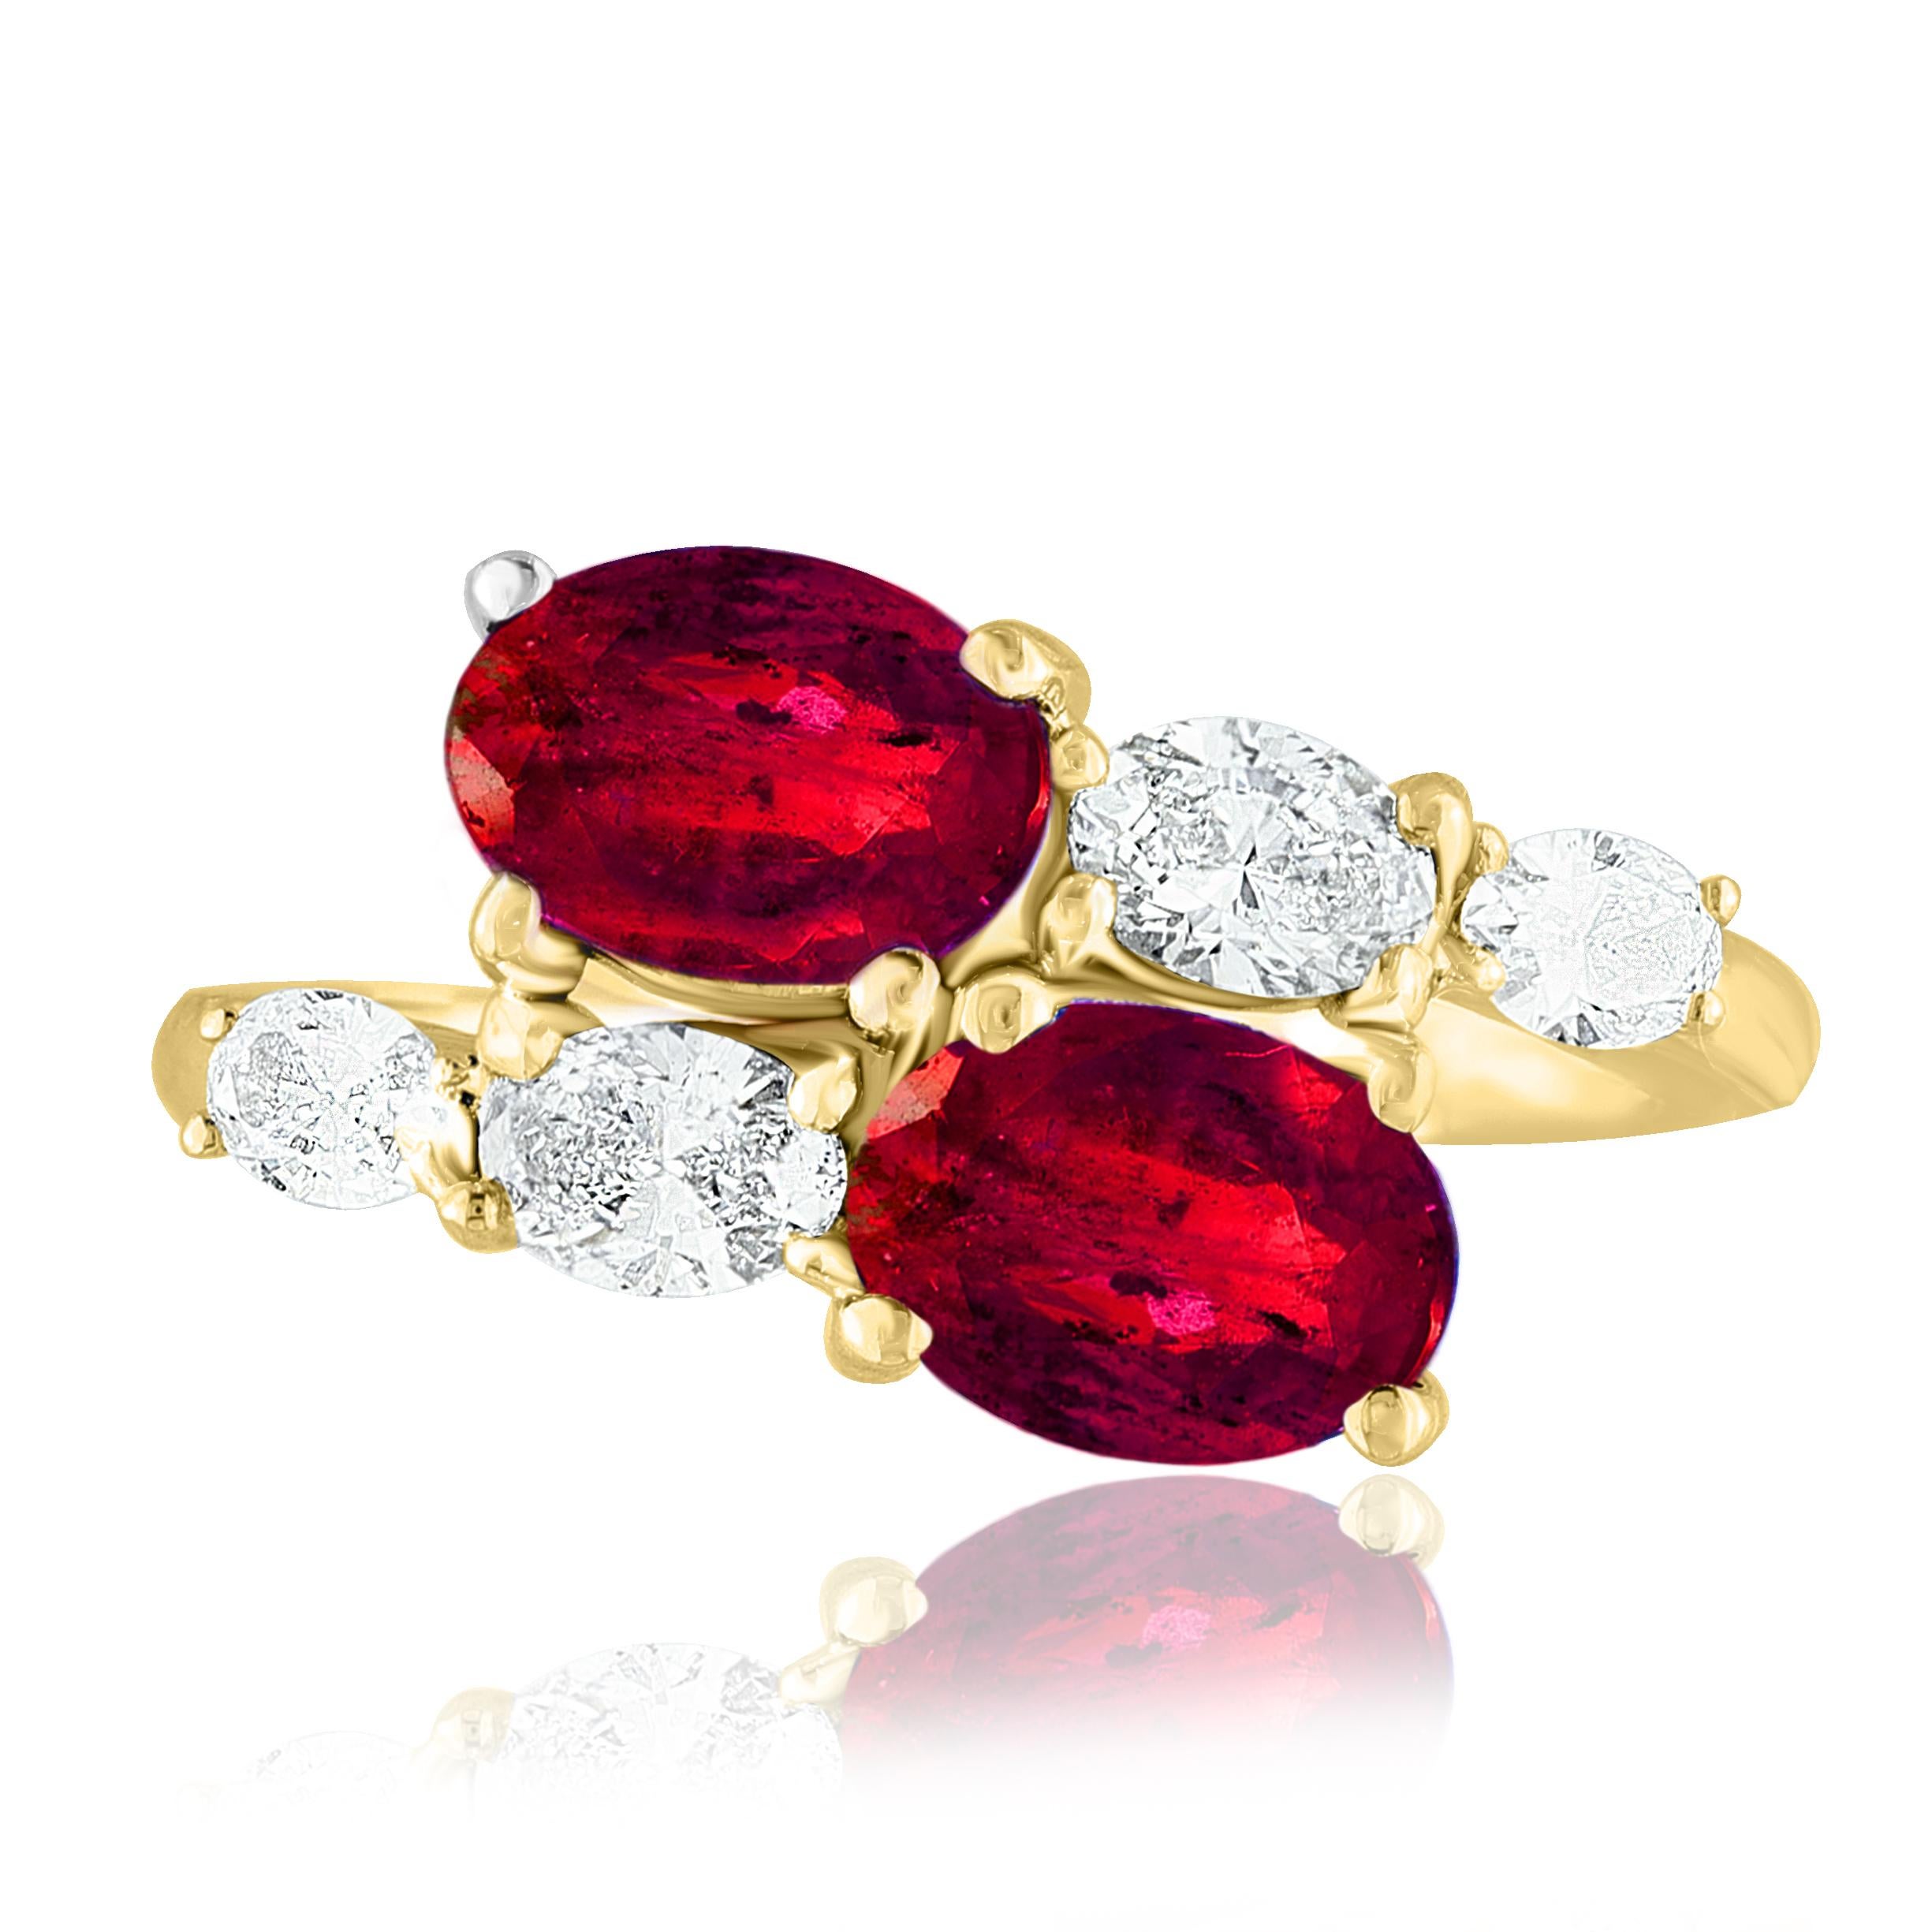 The stunning forever-together Toi et Moi ring features 2 Oval cut Rubies embraced by east to west 4 oval diamonds. Handcrafted in 14k White Gold.
2 oval Rubies in the center weigh 2.18 carats and 4 diamonds on the sides weigh 0.70 carats in total.
A